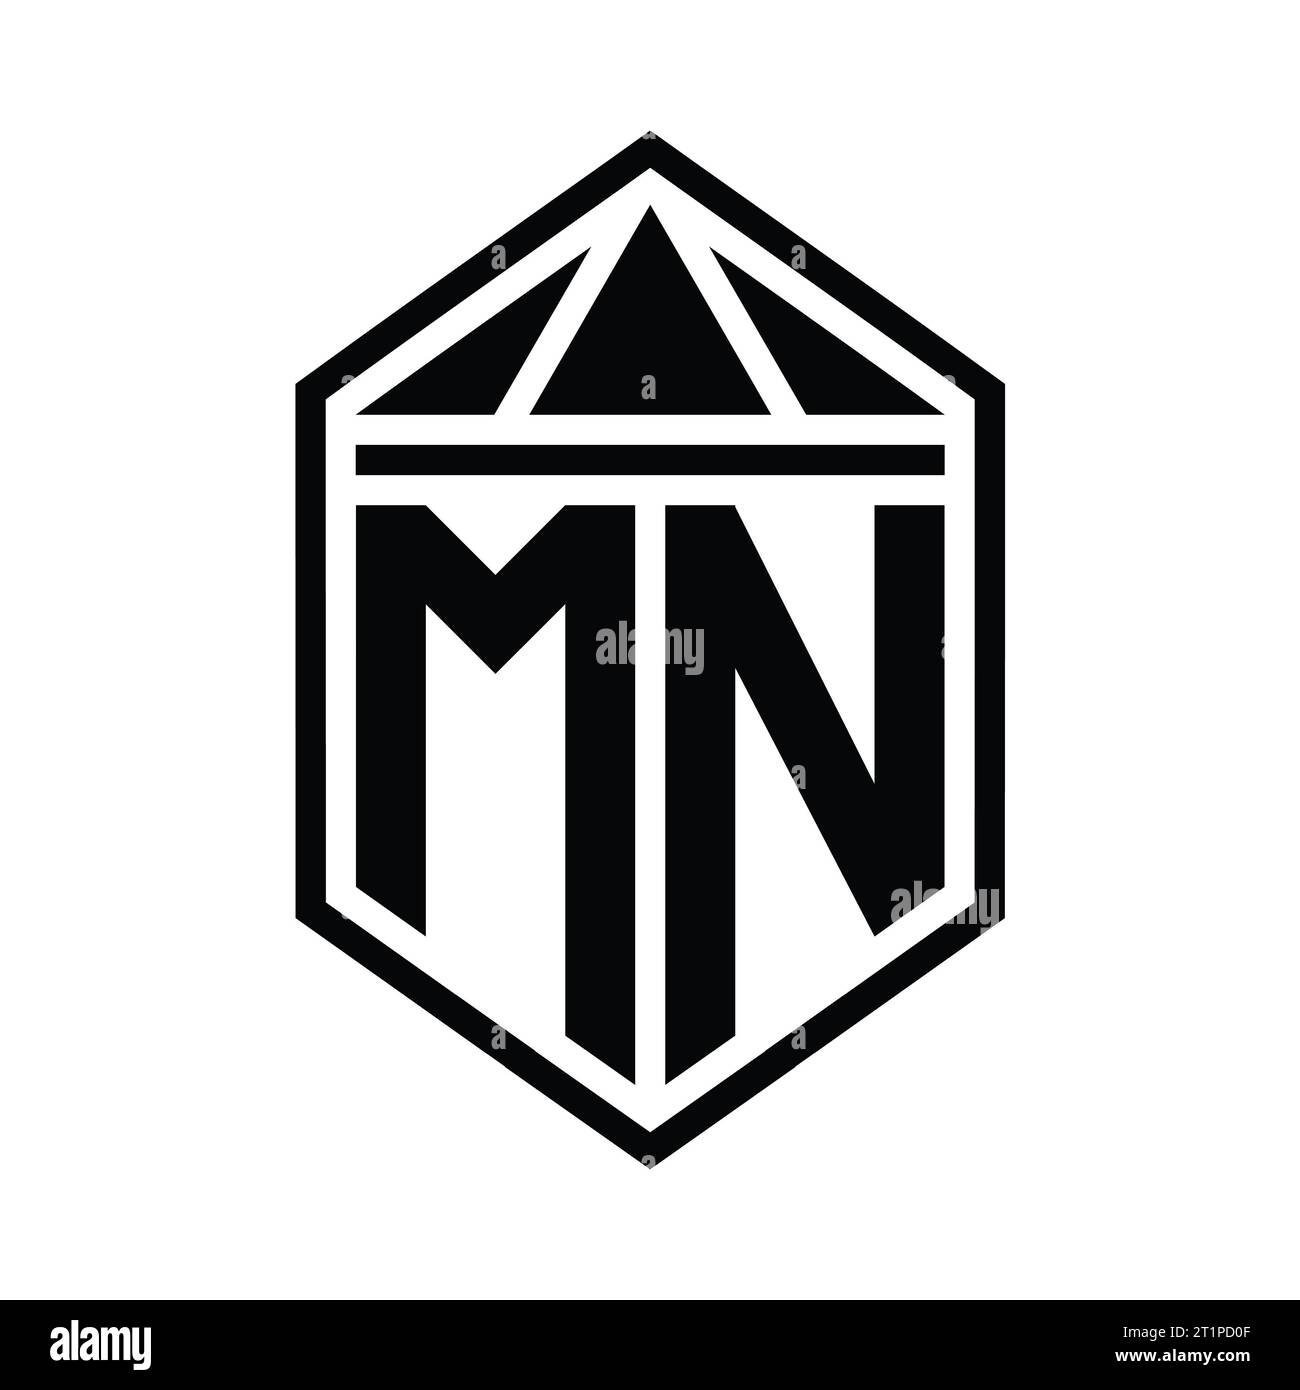 Letter Mm Logo designs, themes, templates and downloadable graphic